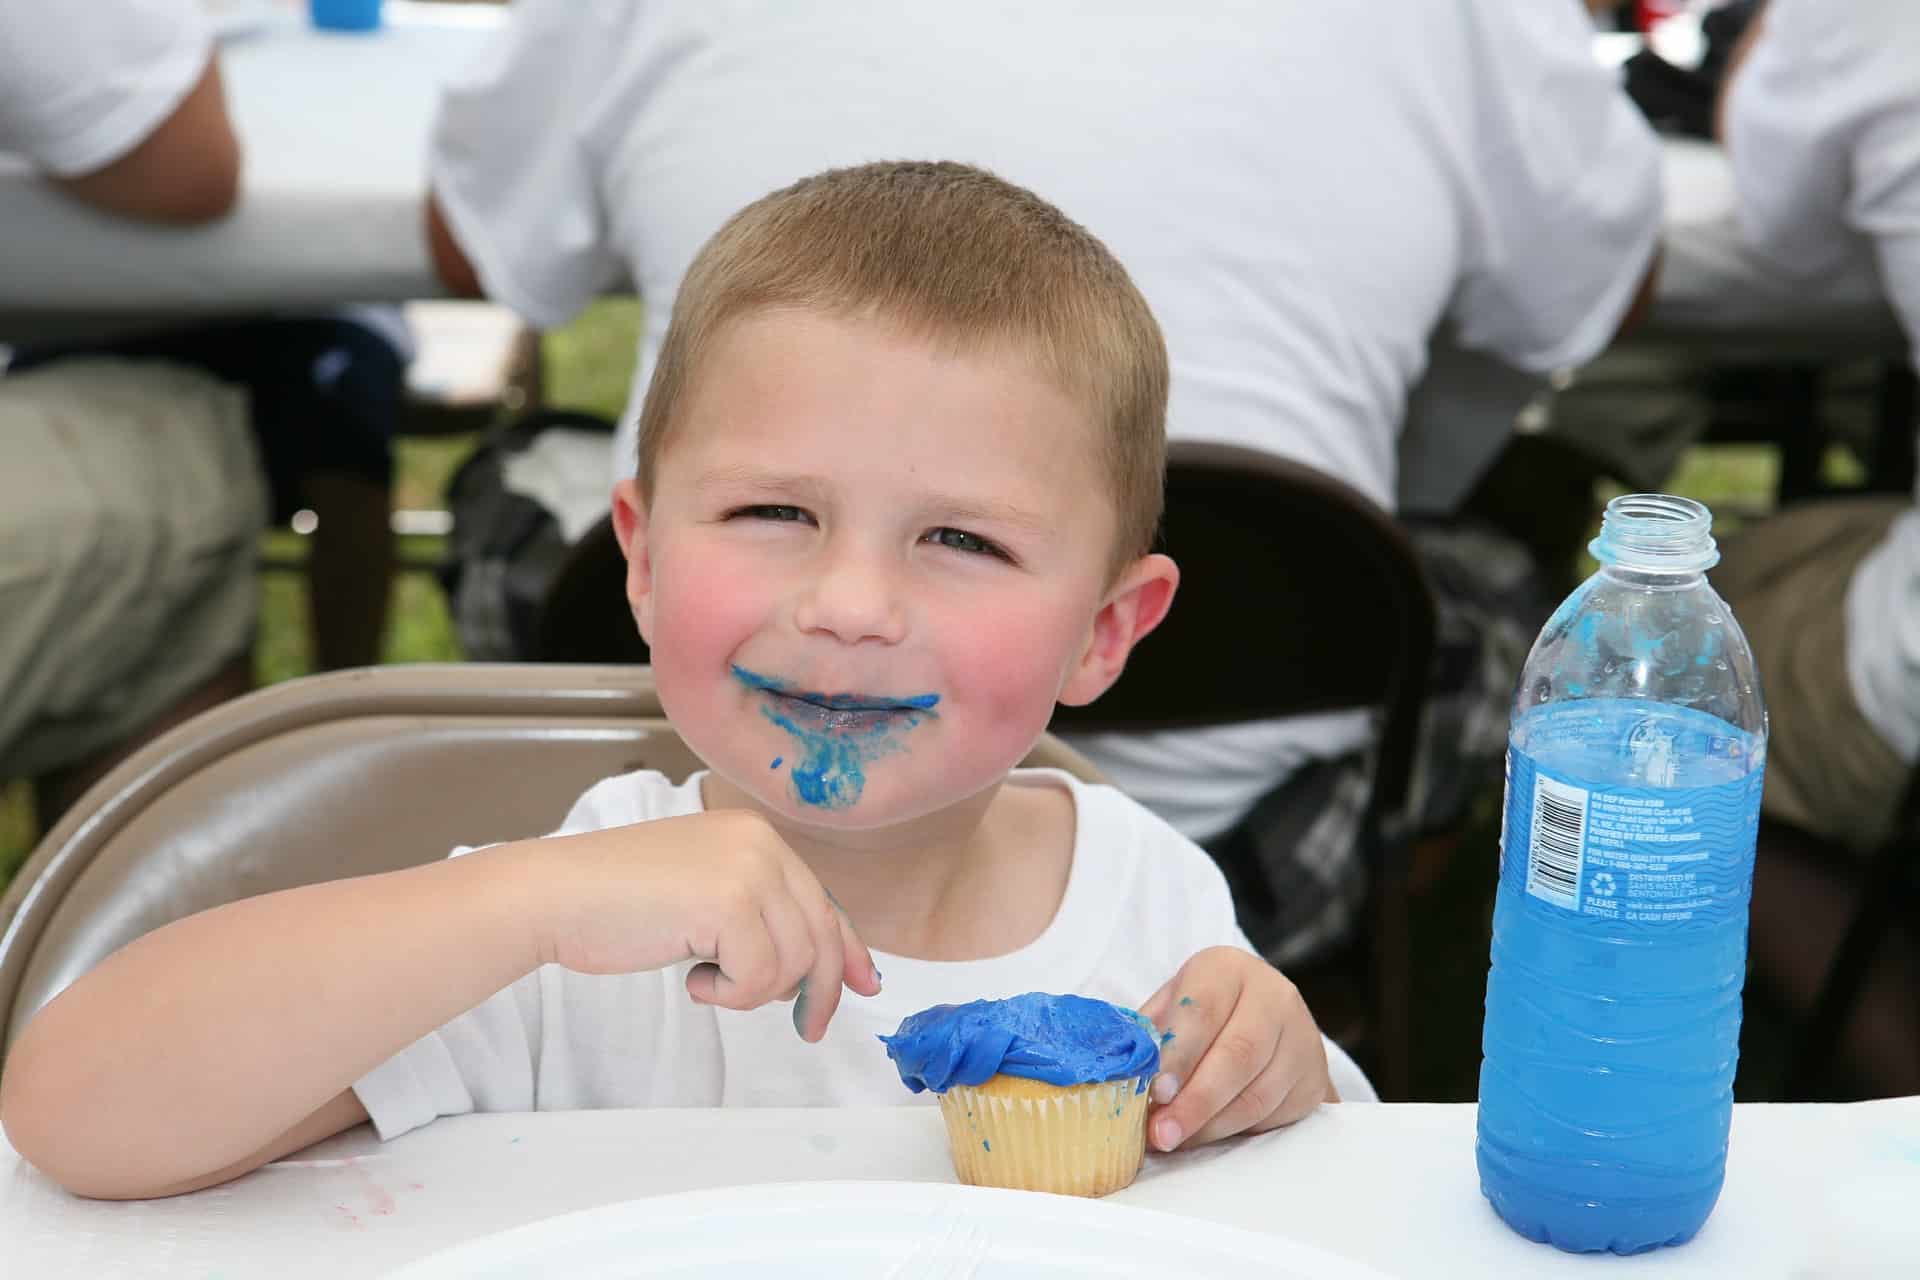 Child happily eating a cupcake. The connection between food and comfort begins at a young age, but can lead to emotional eating.